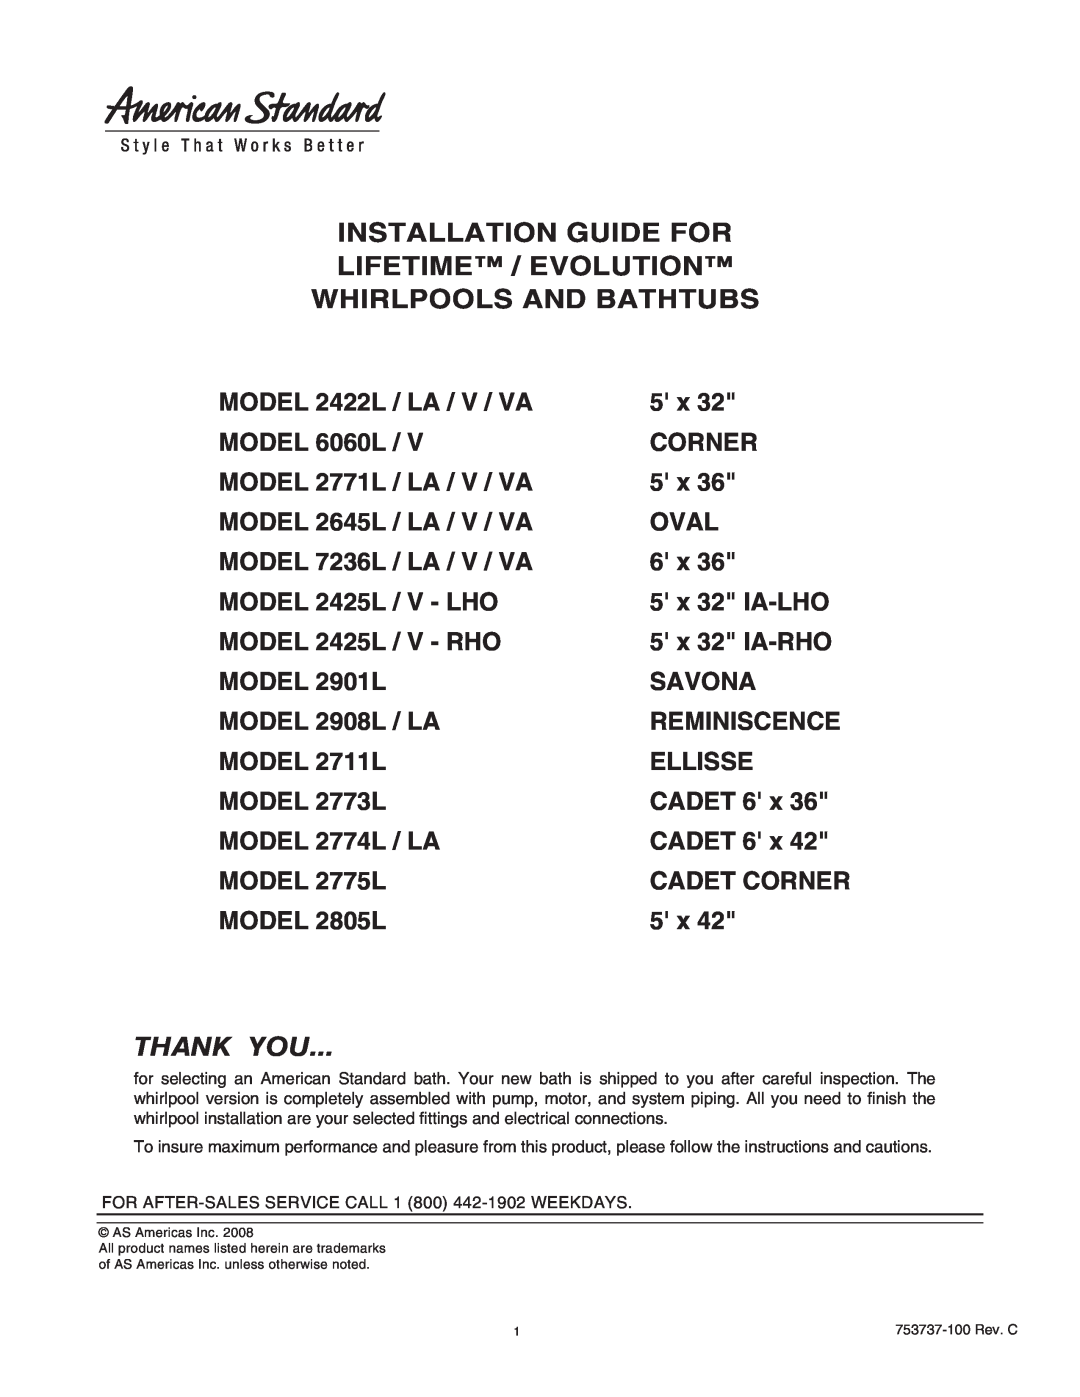 American Standard 2774L/LA, 2773L manual Installation Guide For Lifetime / Evolution Whirlpools And Bathtubs, Thank You 